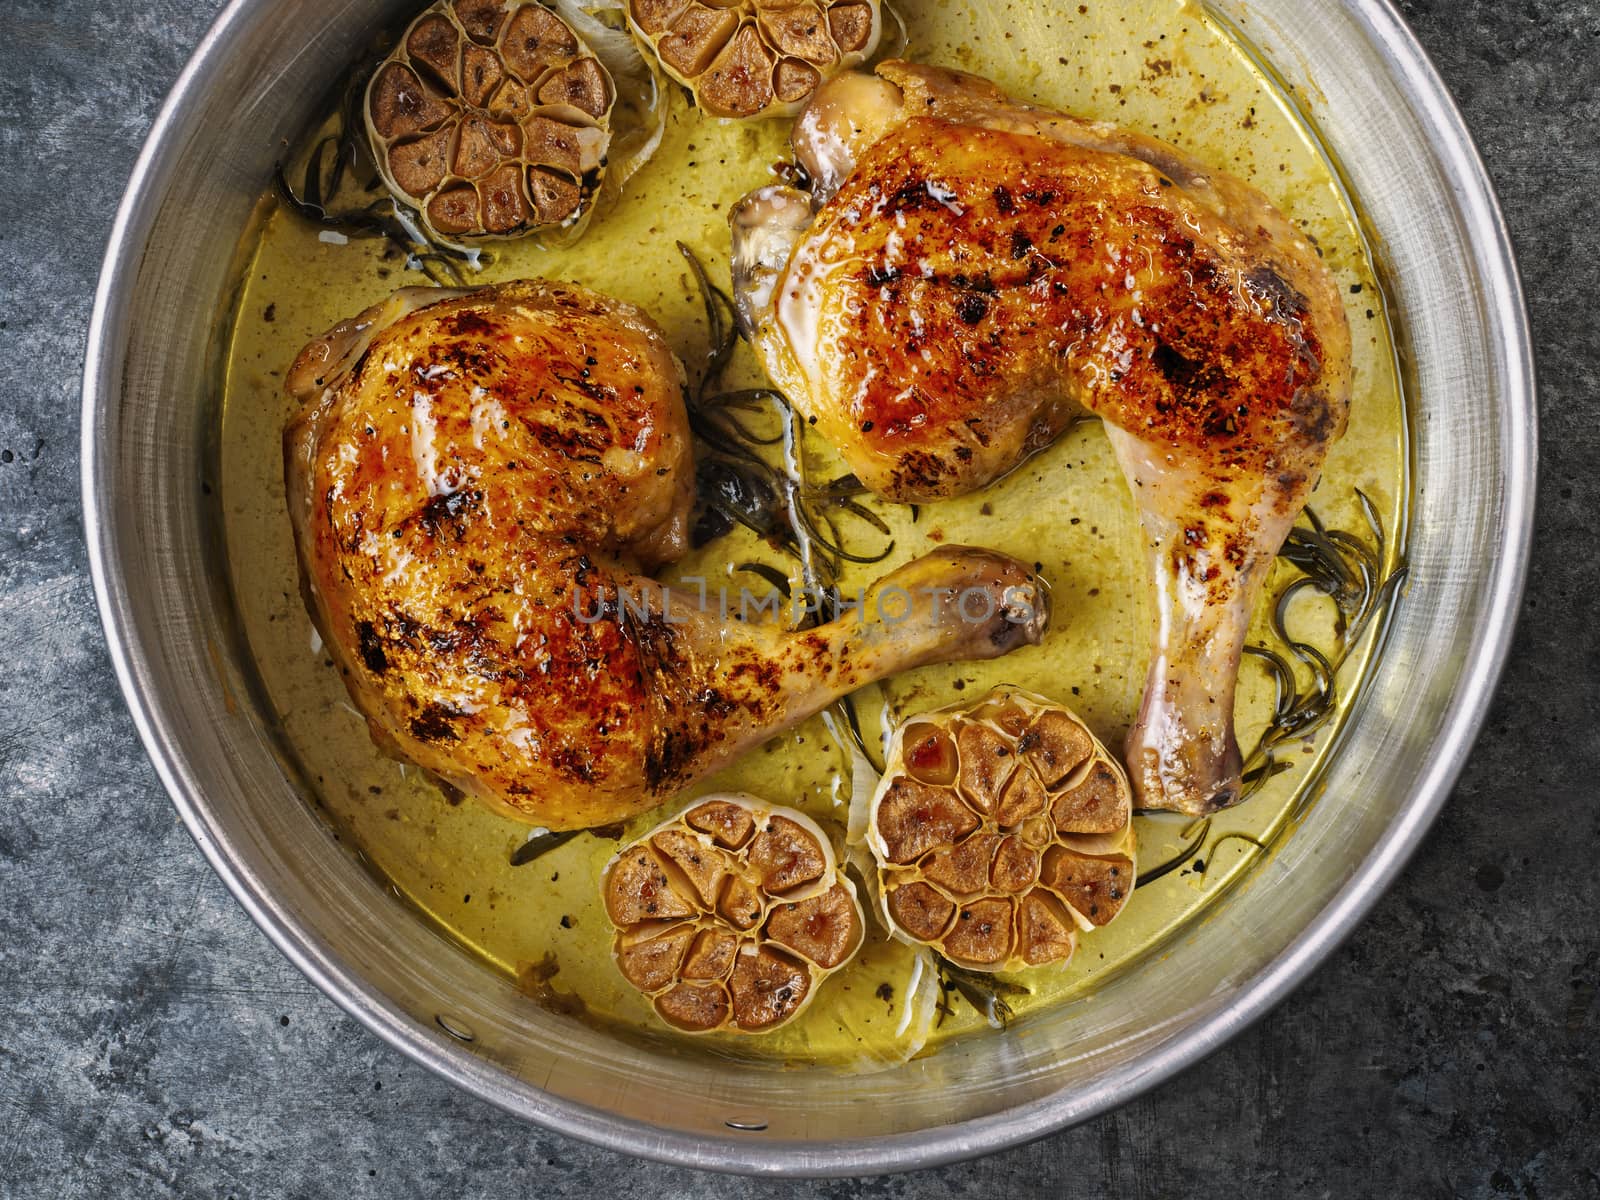 rustic italian roast chicken with garlic and rosemary by zkruger